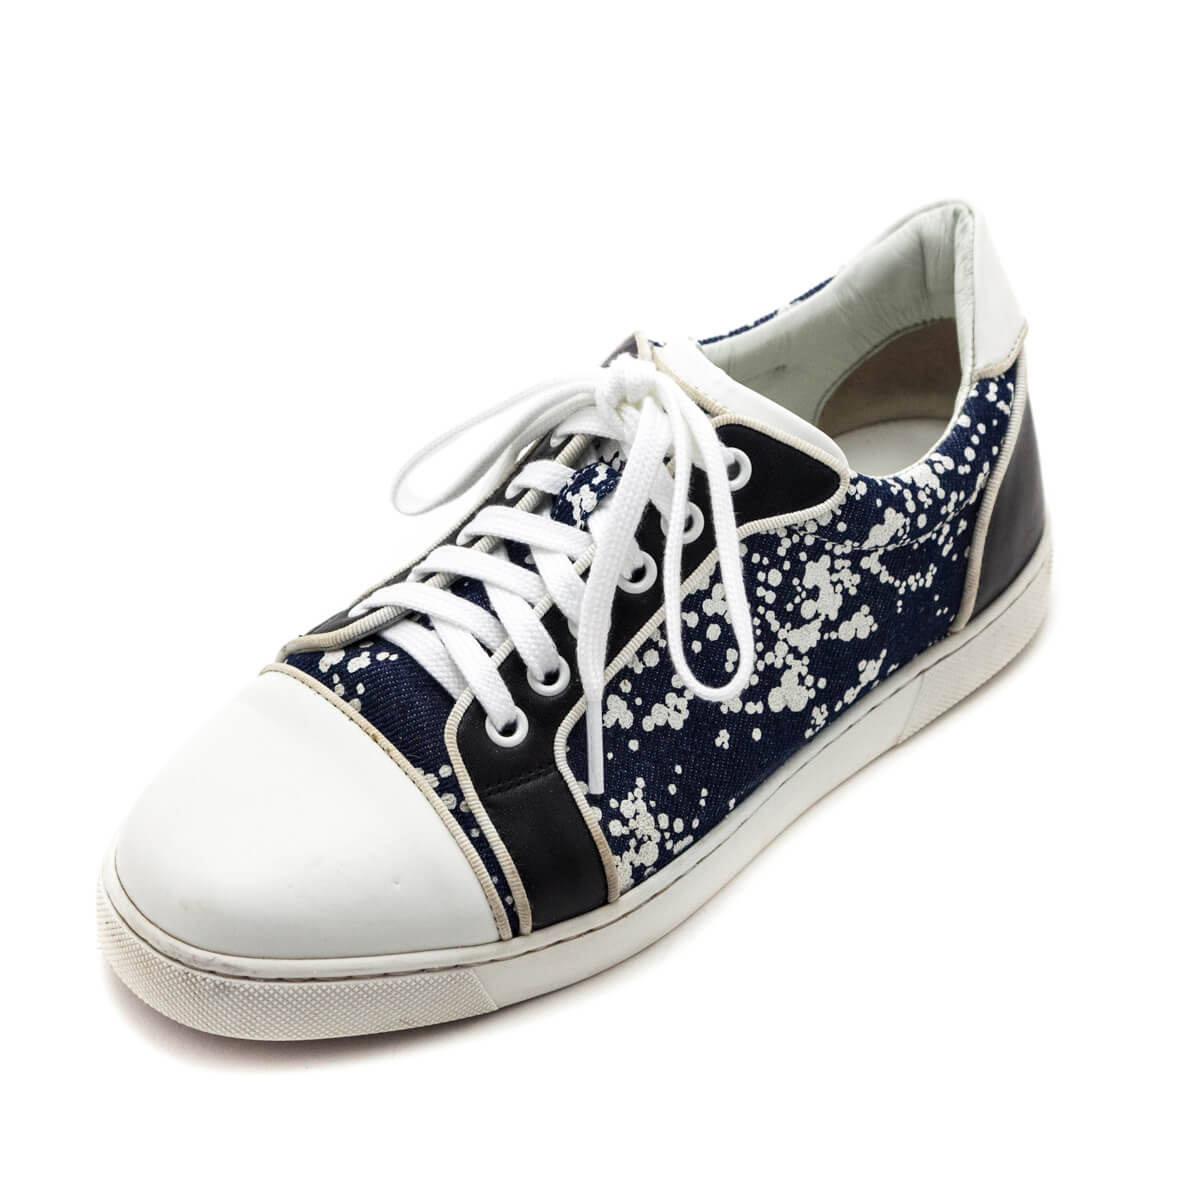 Christian Louboutin Navy & White Paint Low Top Sneakers Size US 8 | EU 38 - Love that Bag etc - Preowned Authentic Designer Handbags & Preloved Fashions